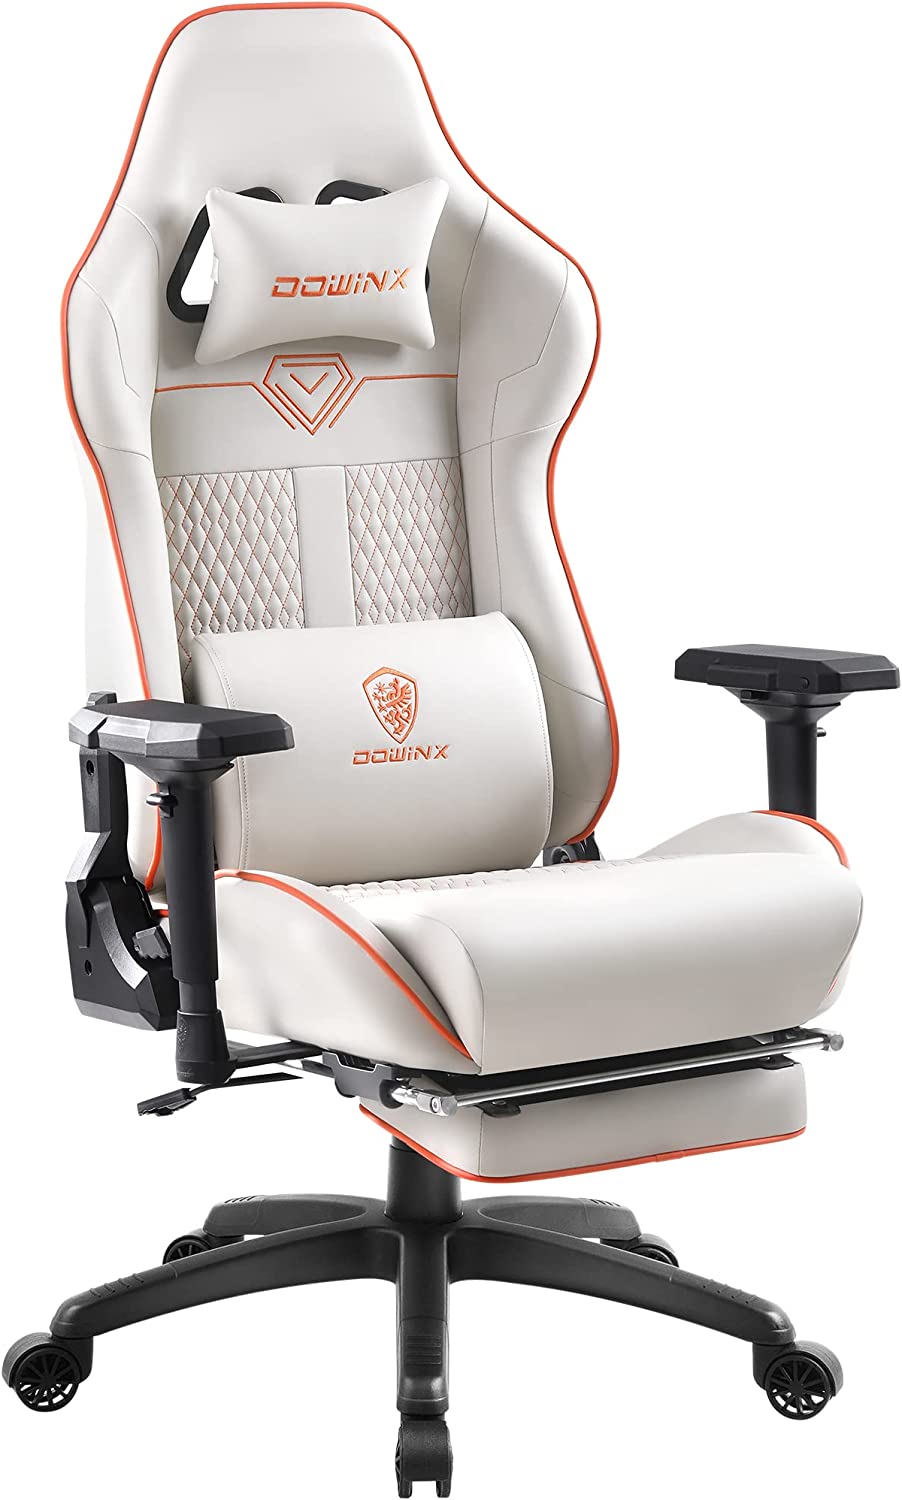 Dowinx Gaming Chair Breathable Quilted PU Leather Gamer Chair with Customized 4D Armrests, Ergonomic Game Chair with Massage (White)